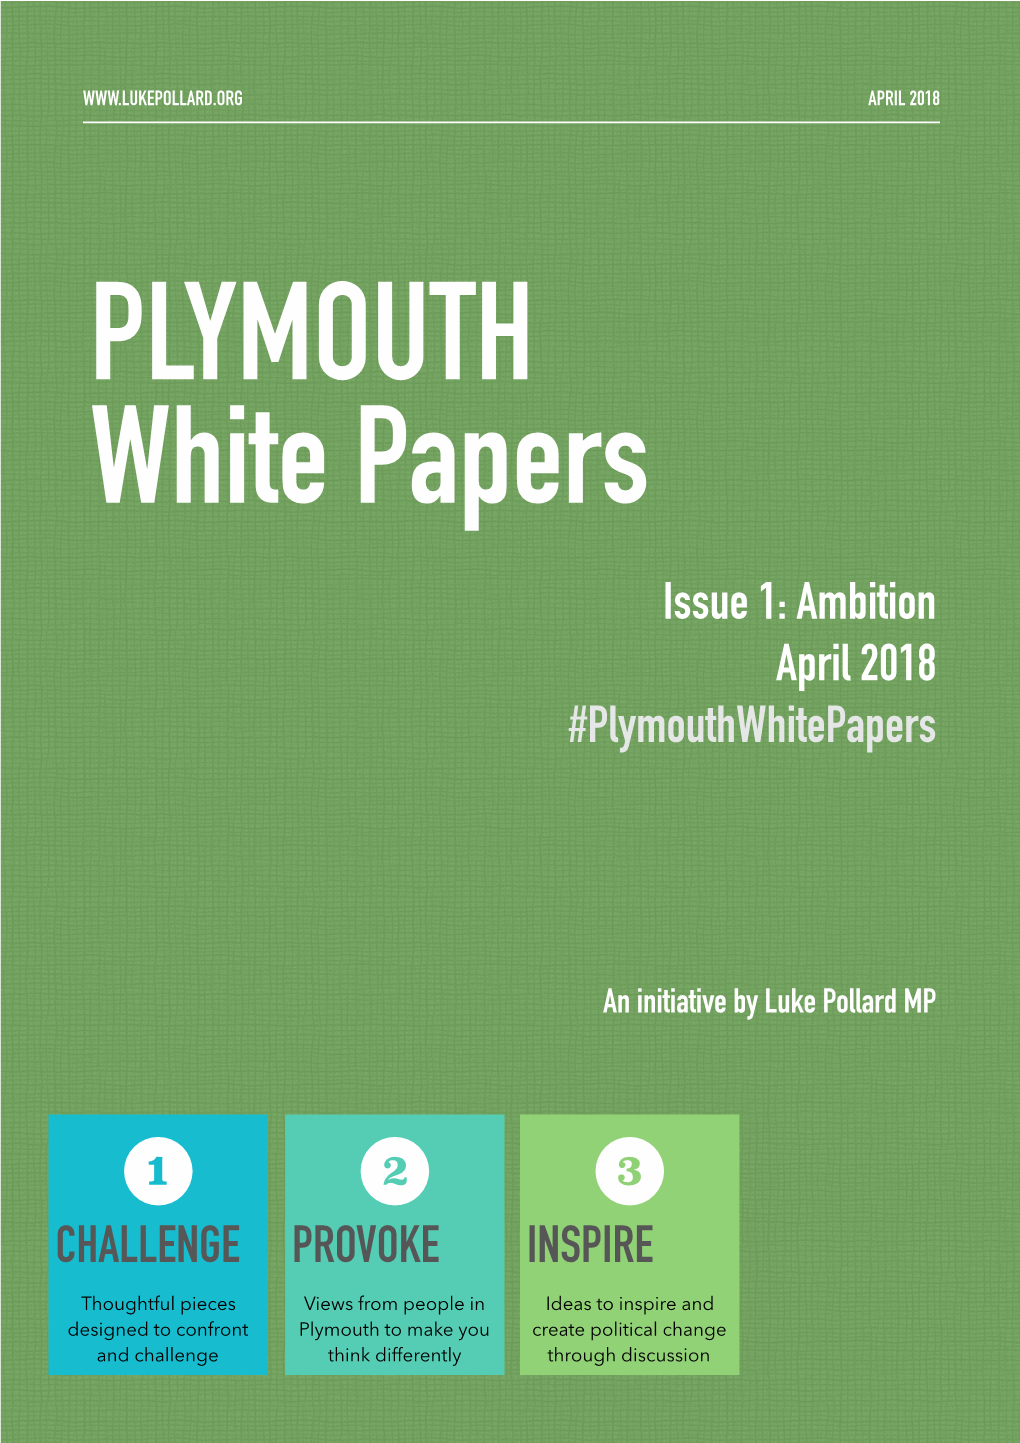 PLYMOUTH White Papers Issue 1: Ambition April 2018 #Plymouthwhitepapers